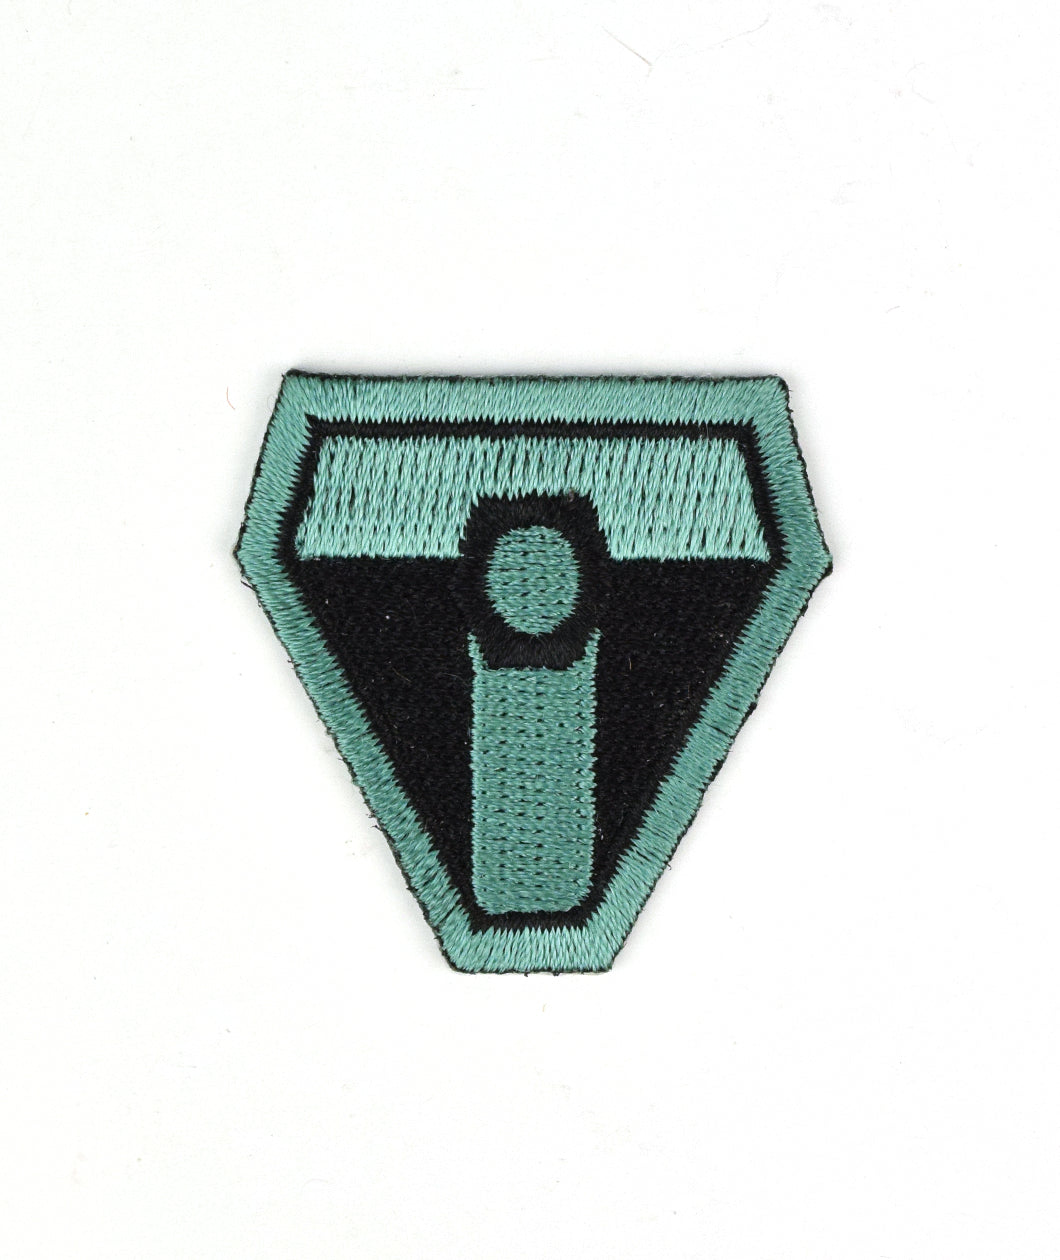 A black upside down triangular patch with a thick teal outline and squared off edges. A teal “T” is in the center with a black octagon in the center and a teal circle in the center of that - from Tesladyne